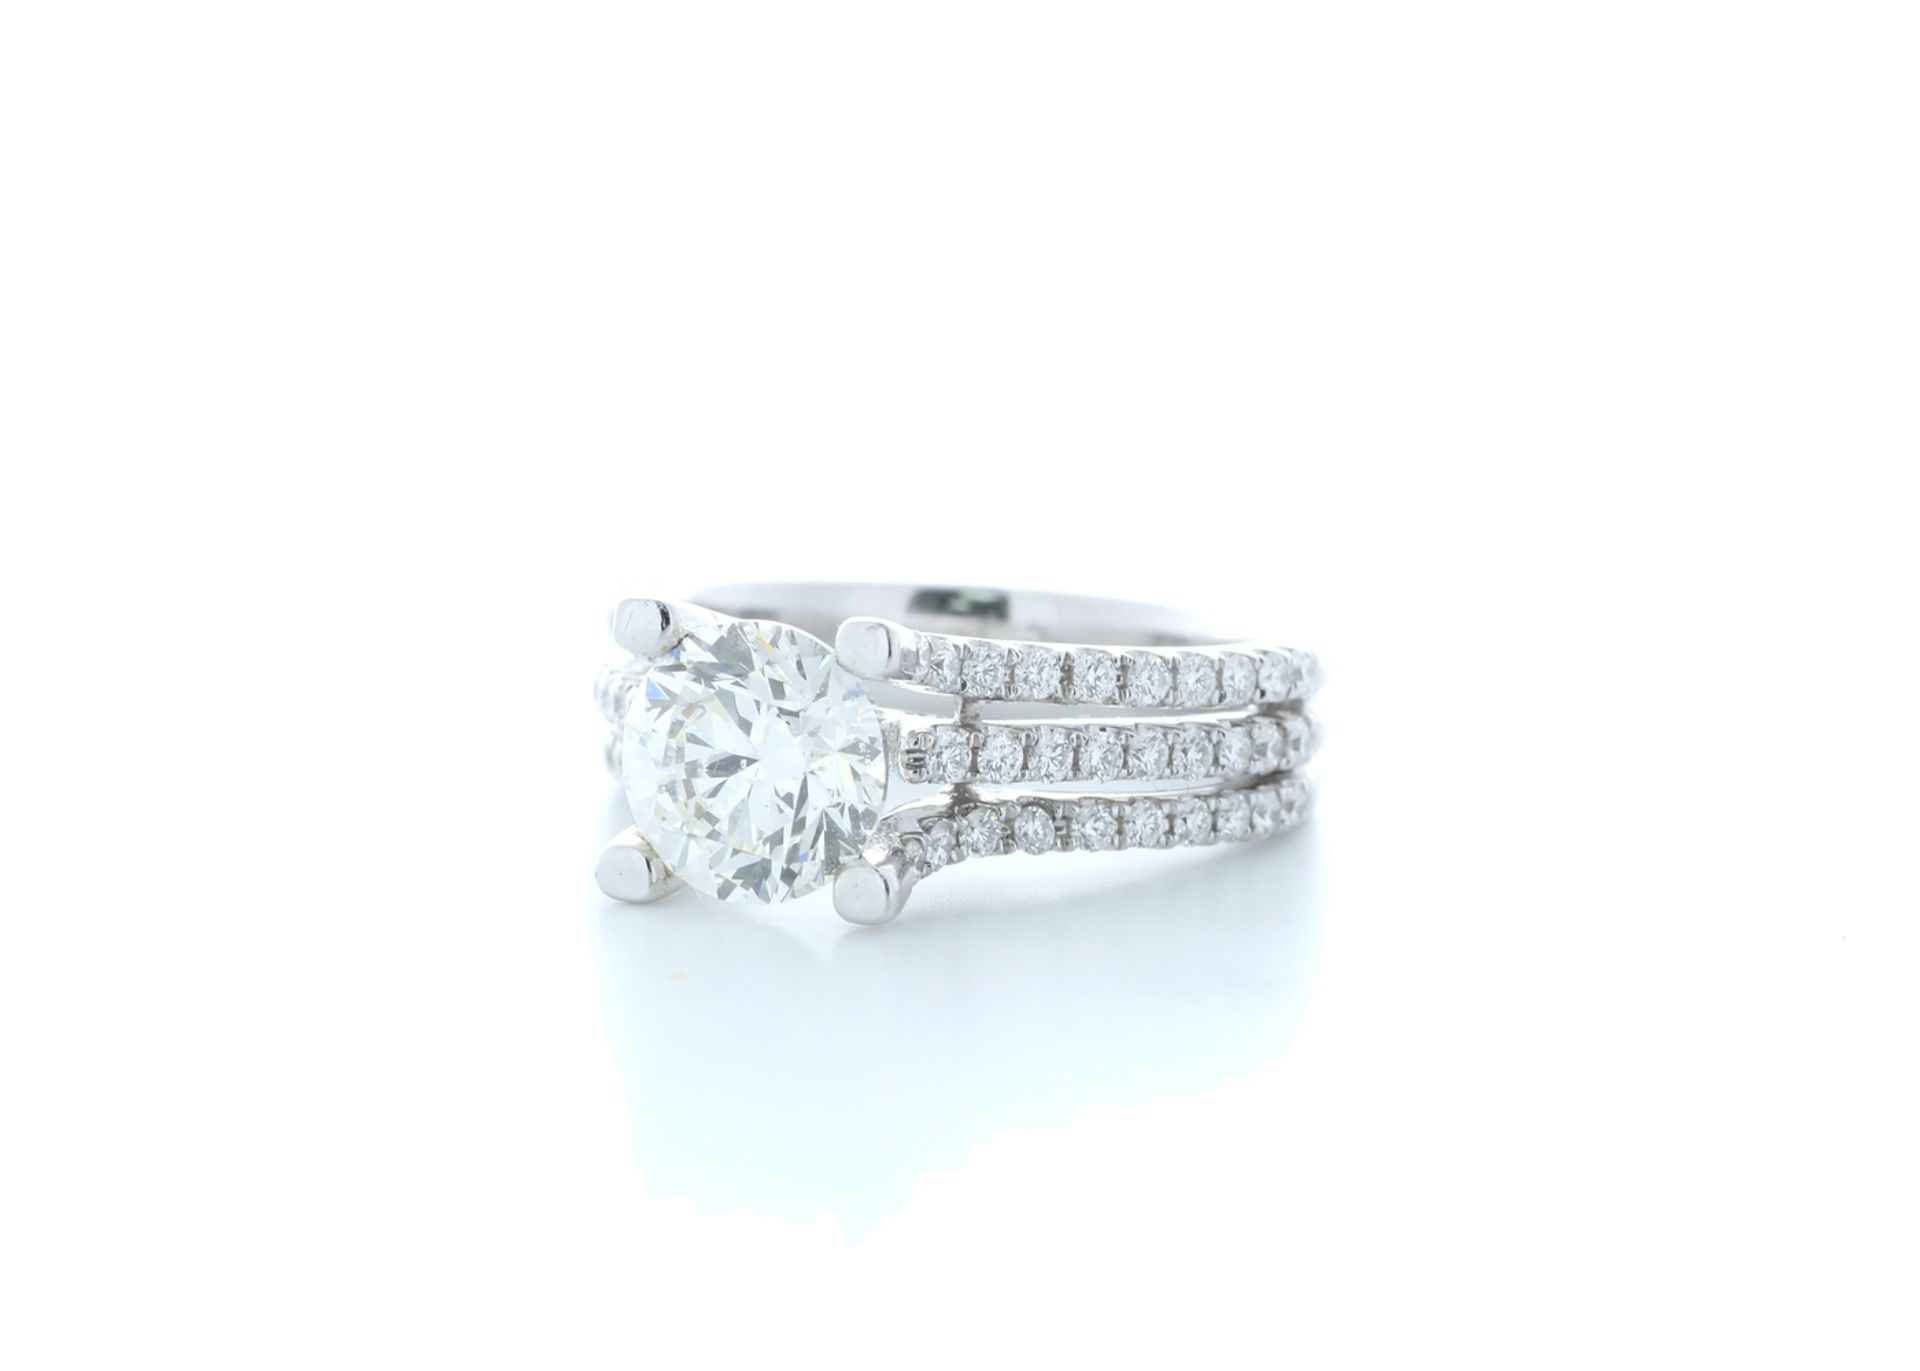 18ct White Gold Three Row Diamond Ring 3.10 (2.1) Carats - Valued by IDI £78,950.00 - 18ct White - Image 2 of 5